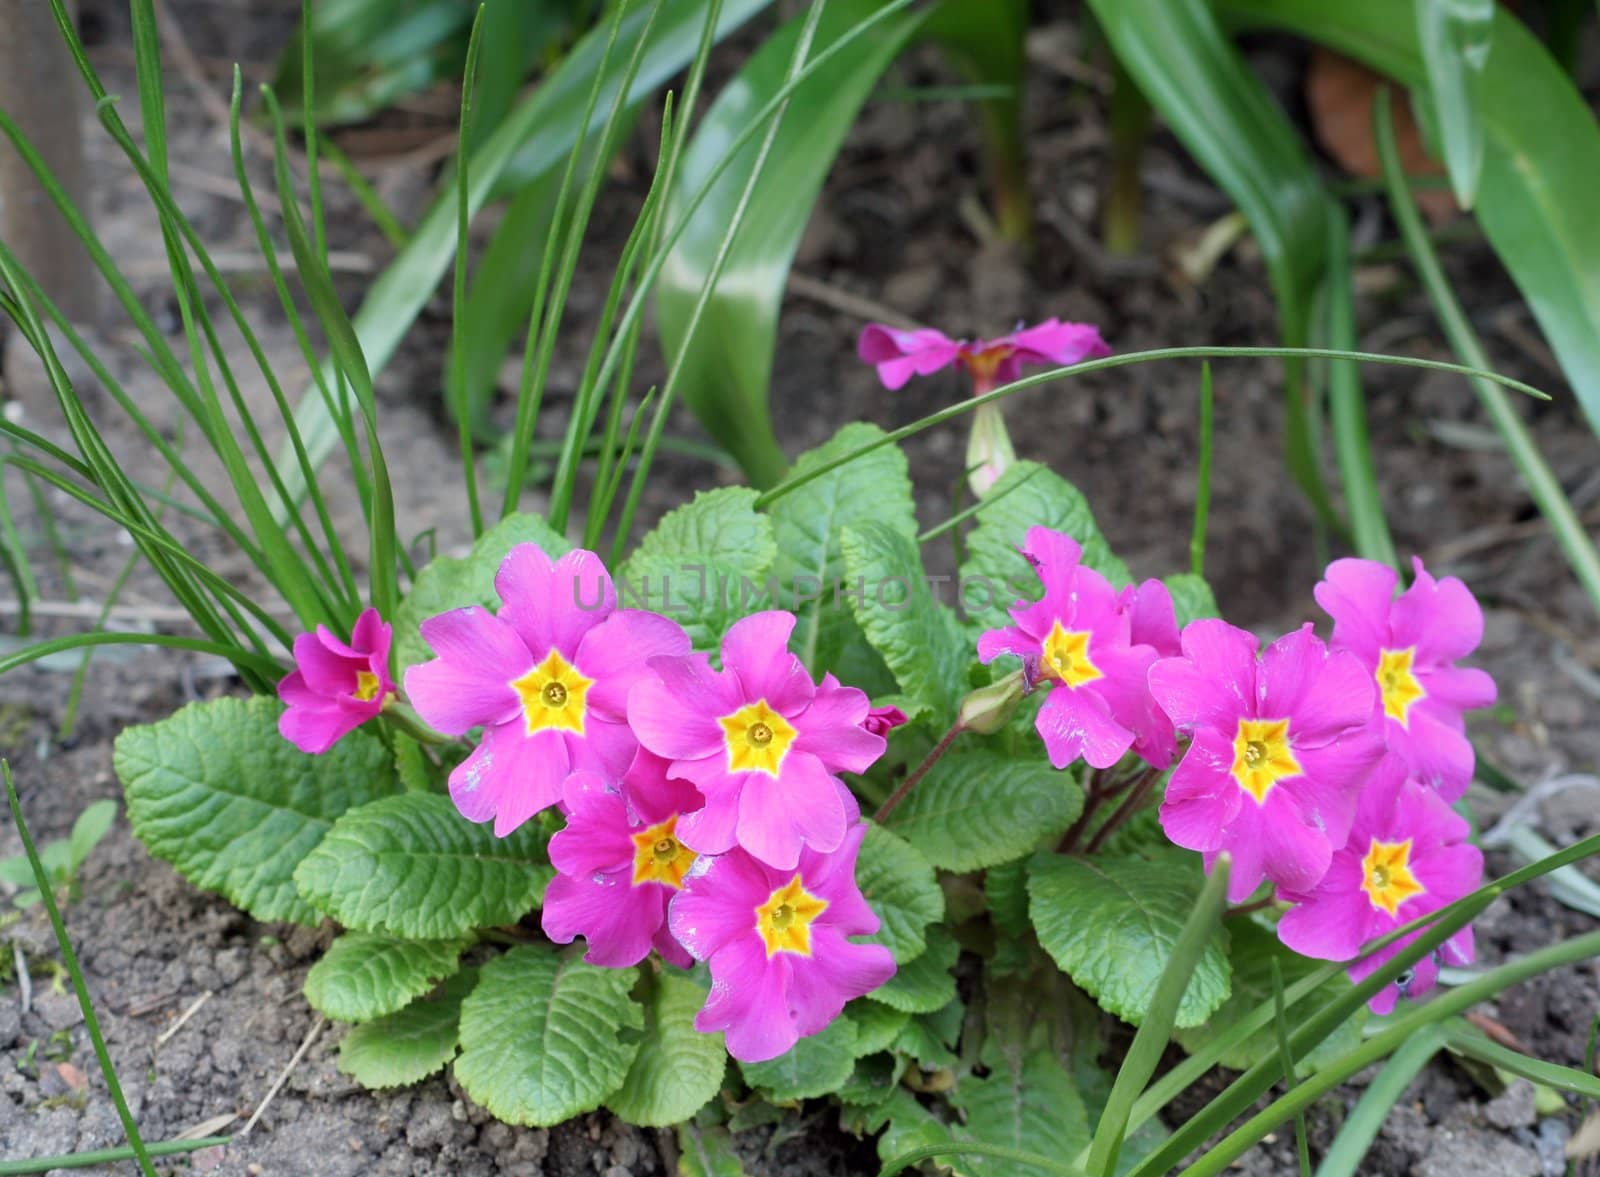 Pink primroses with a yellow eye (Primula vulgaris sibthorpii), end of March 2007 in a garden in Northern-Germany.